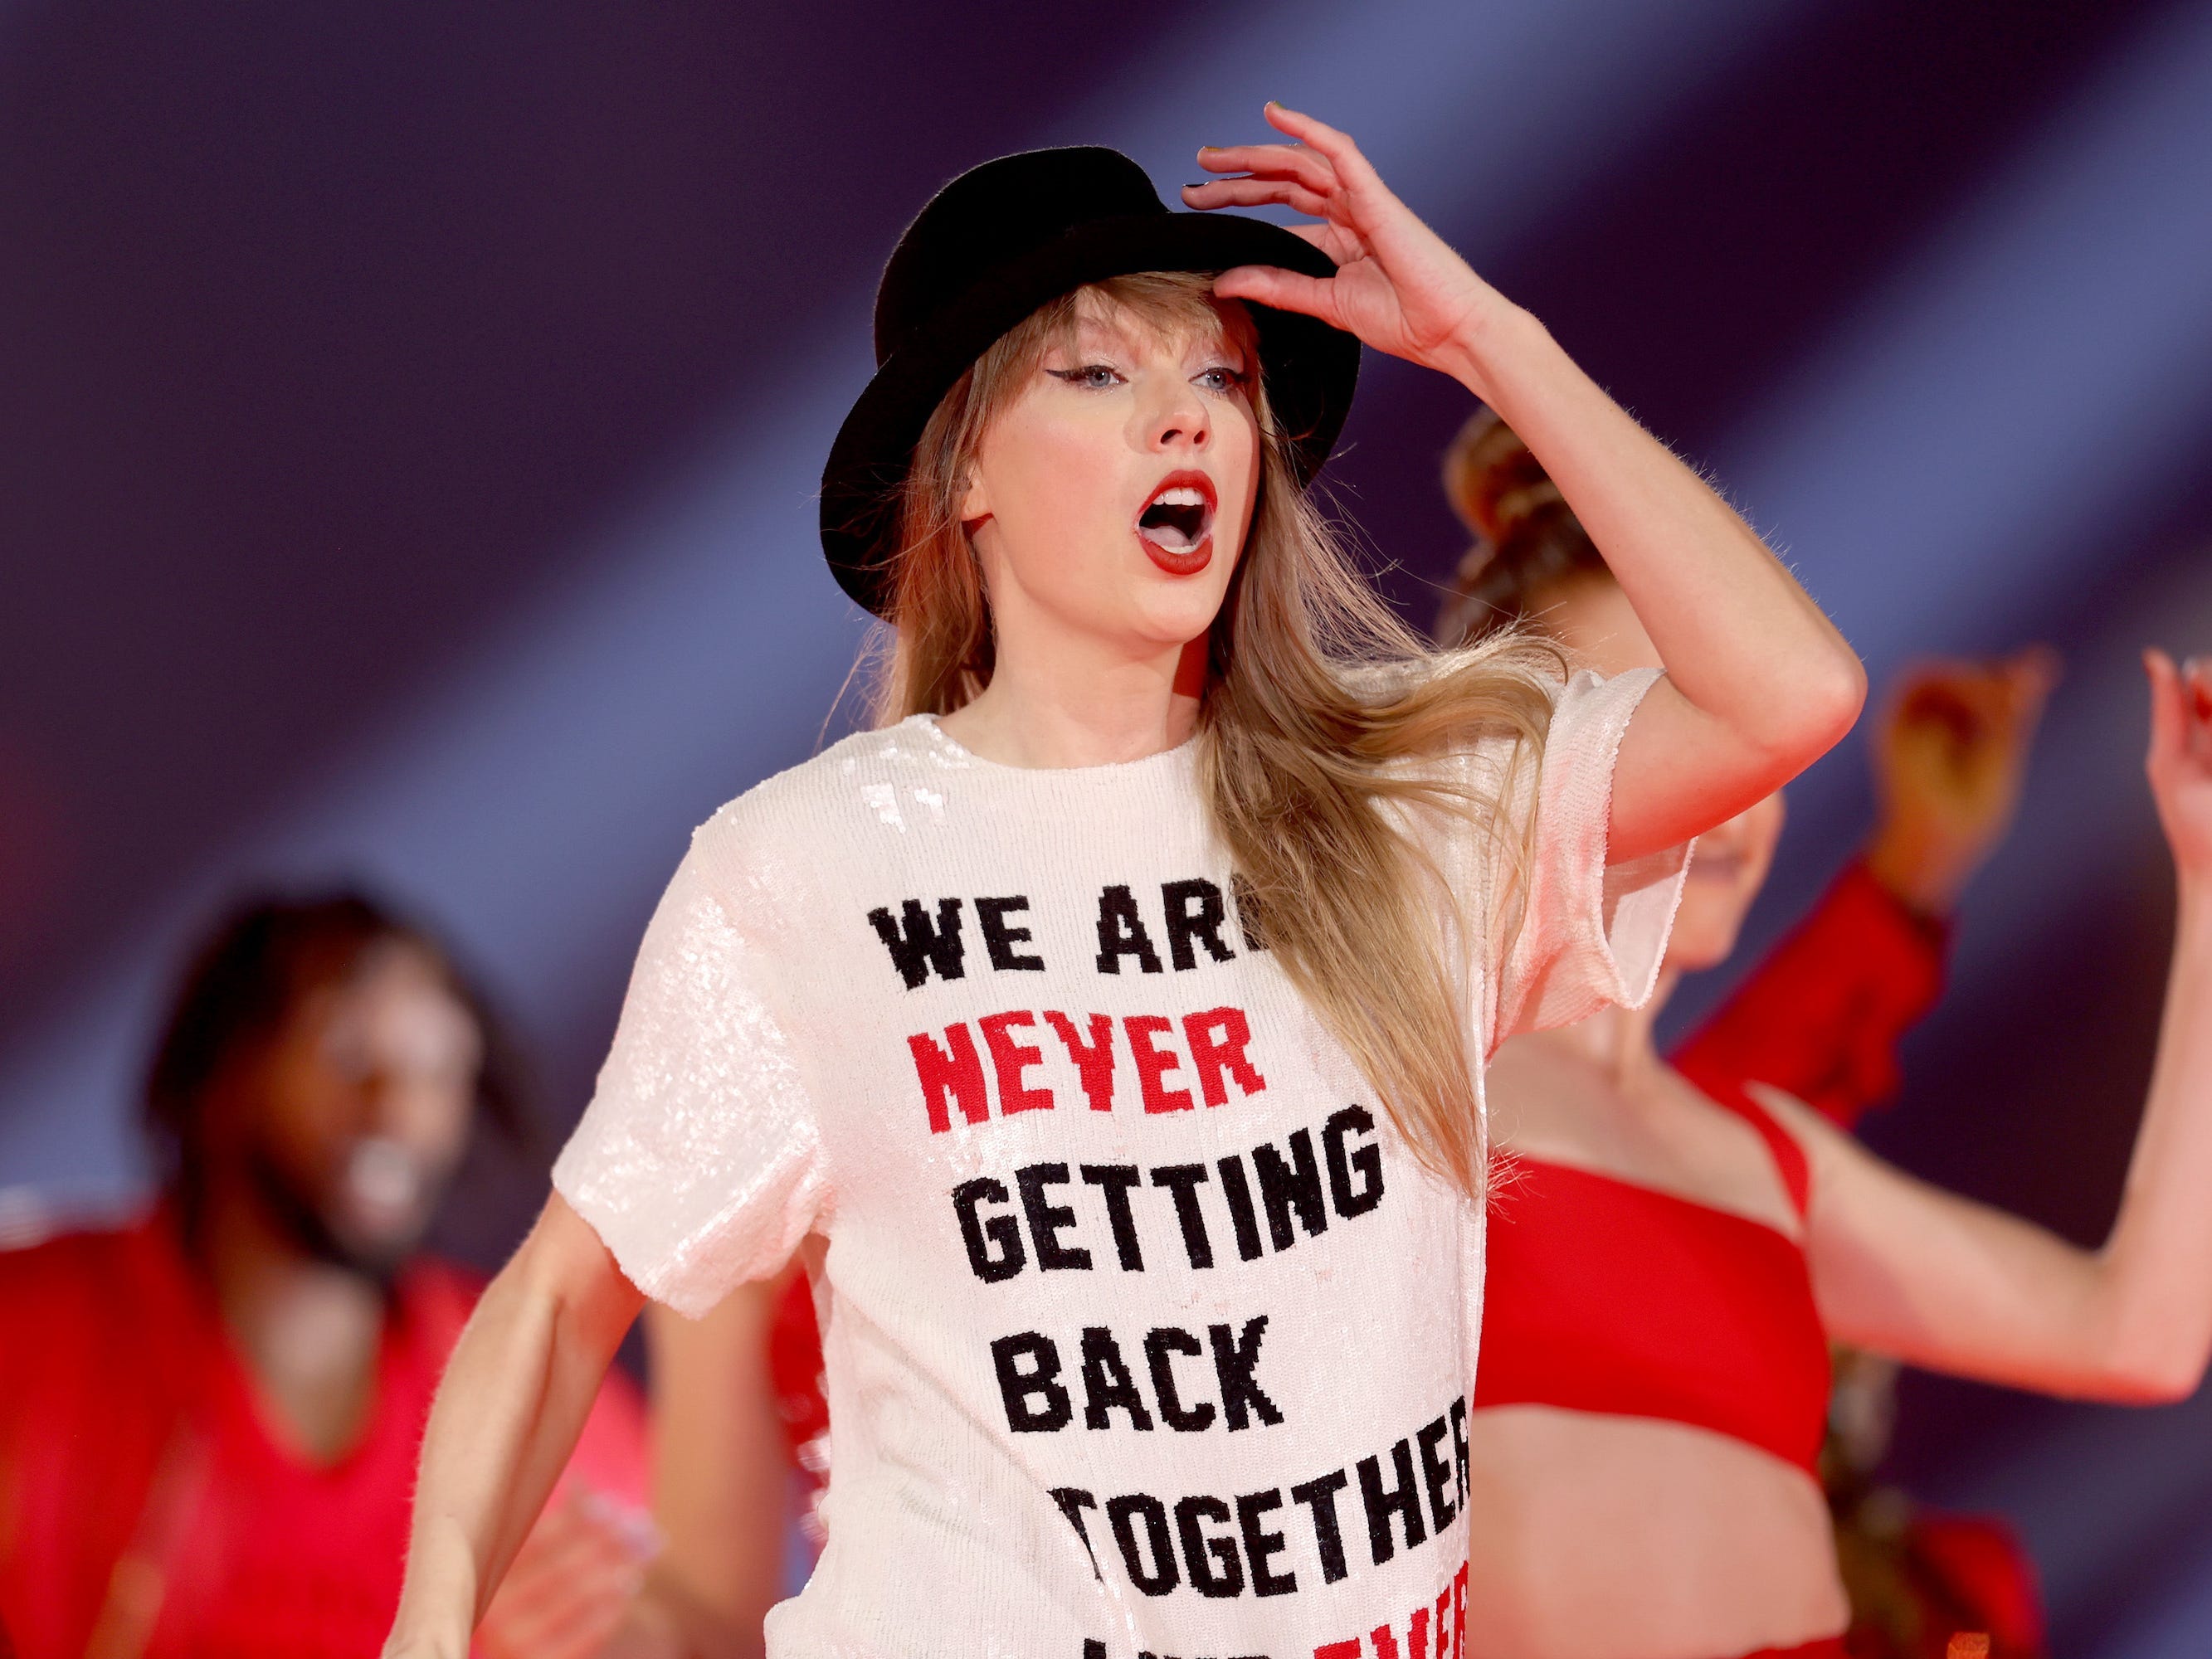 <p>There are three versions of this shirt, inspired by an outfit worn by Swift in the "22" music video: "A lot going on at the moment," "We are never getting back together like ever," and "Who's Taylor Swift anyway? Ew." The shirt is always paired with a black bowler hat.</p><p>The shirt isn't exactly high-fashion, but it gets extra points for the nostalgia factor. The hat is ugly, but it gets even more extra points for the cuteness factor, since Swift always gives it to <a href="https://www.insider.com/taylor-swift-kobe-bryant-daughter-bianka-hug-eras-tour-2023-8">a special fan in the crowd</a>.</p>